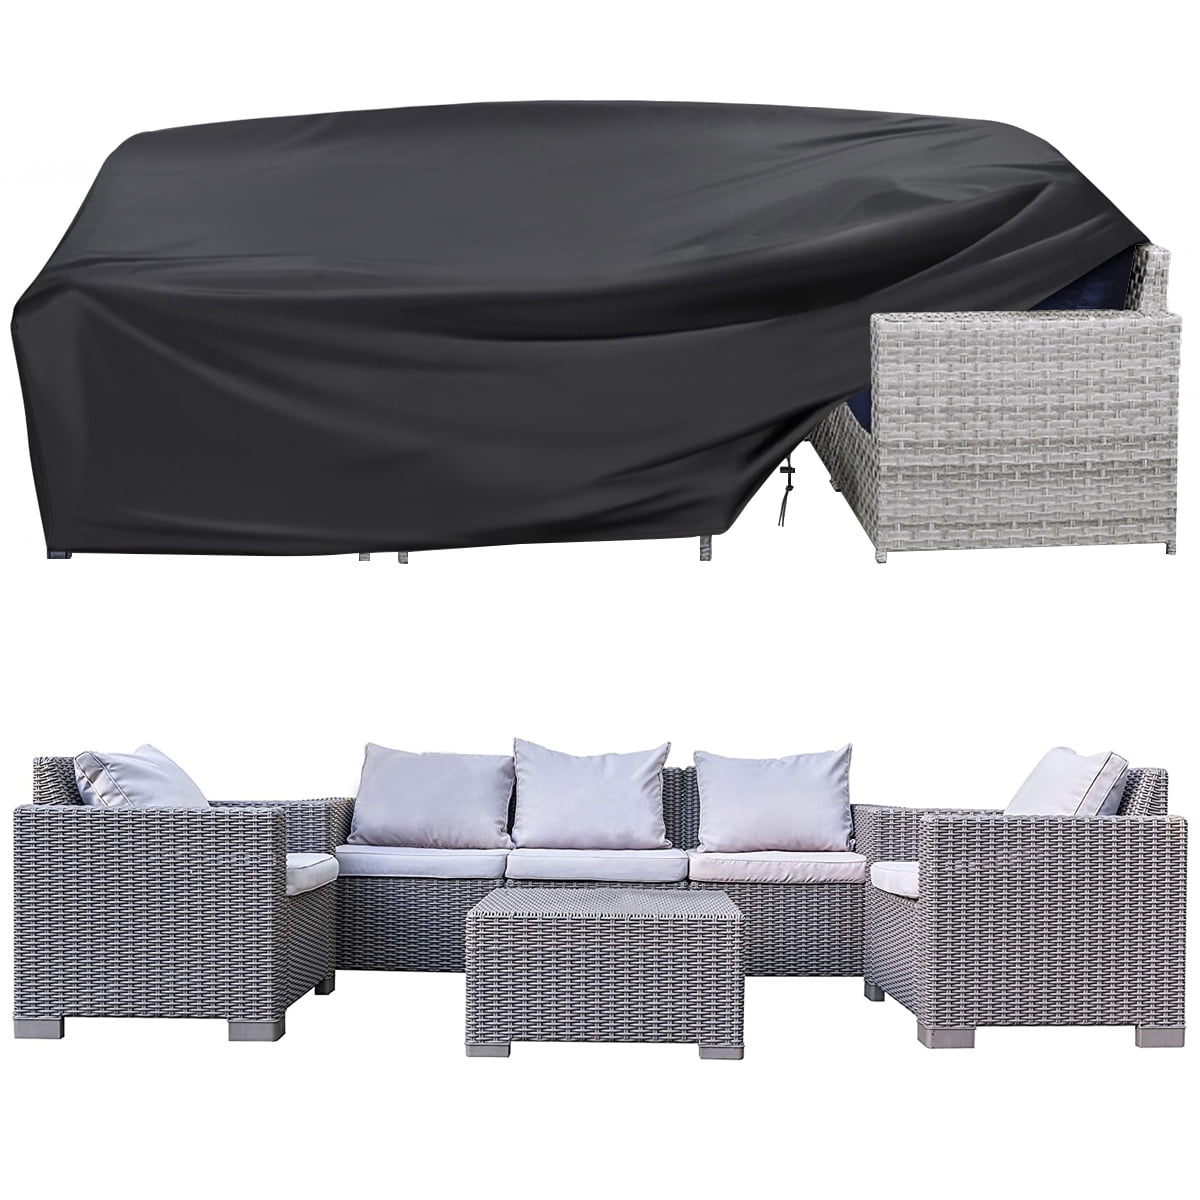 Outdoor Garden Ratten Furniture Cover Extra Large Patio Table Rain Protection 